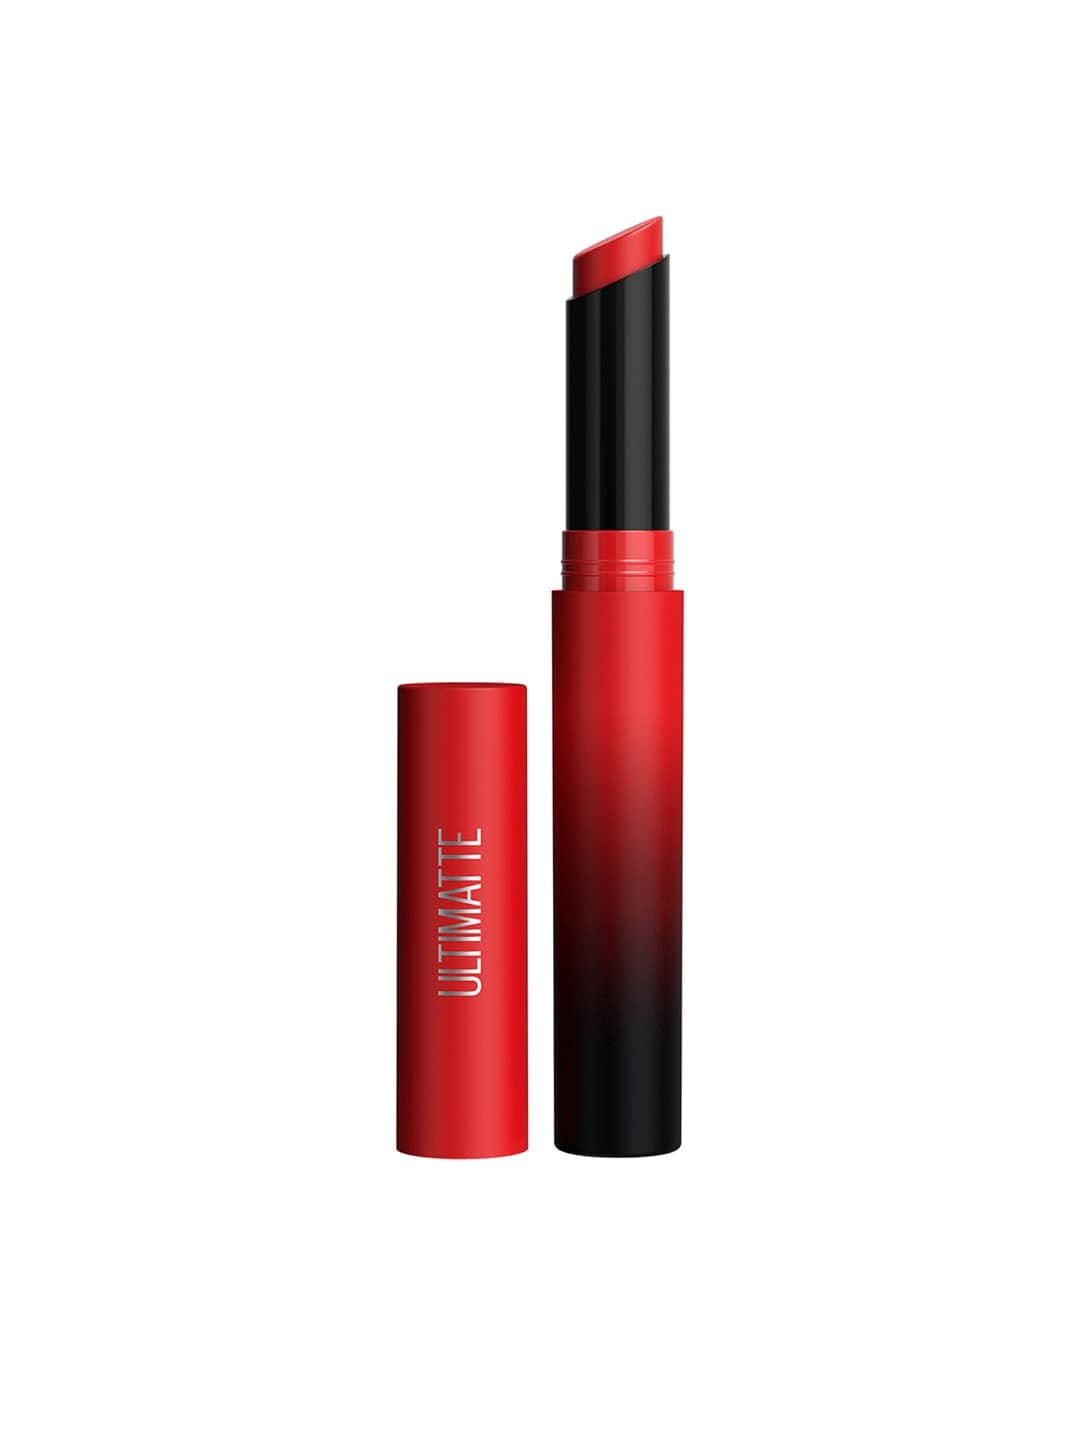 Maybelline New York Color Sensational Ultimattes Lipstick- 199 More Ruby- 1.7g Price in India